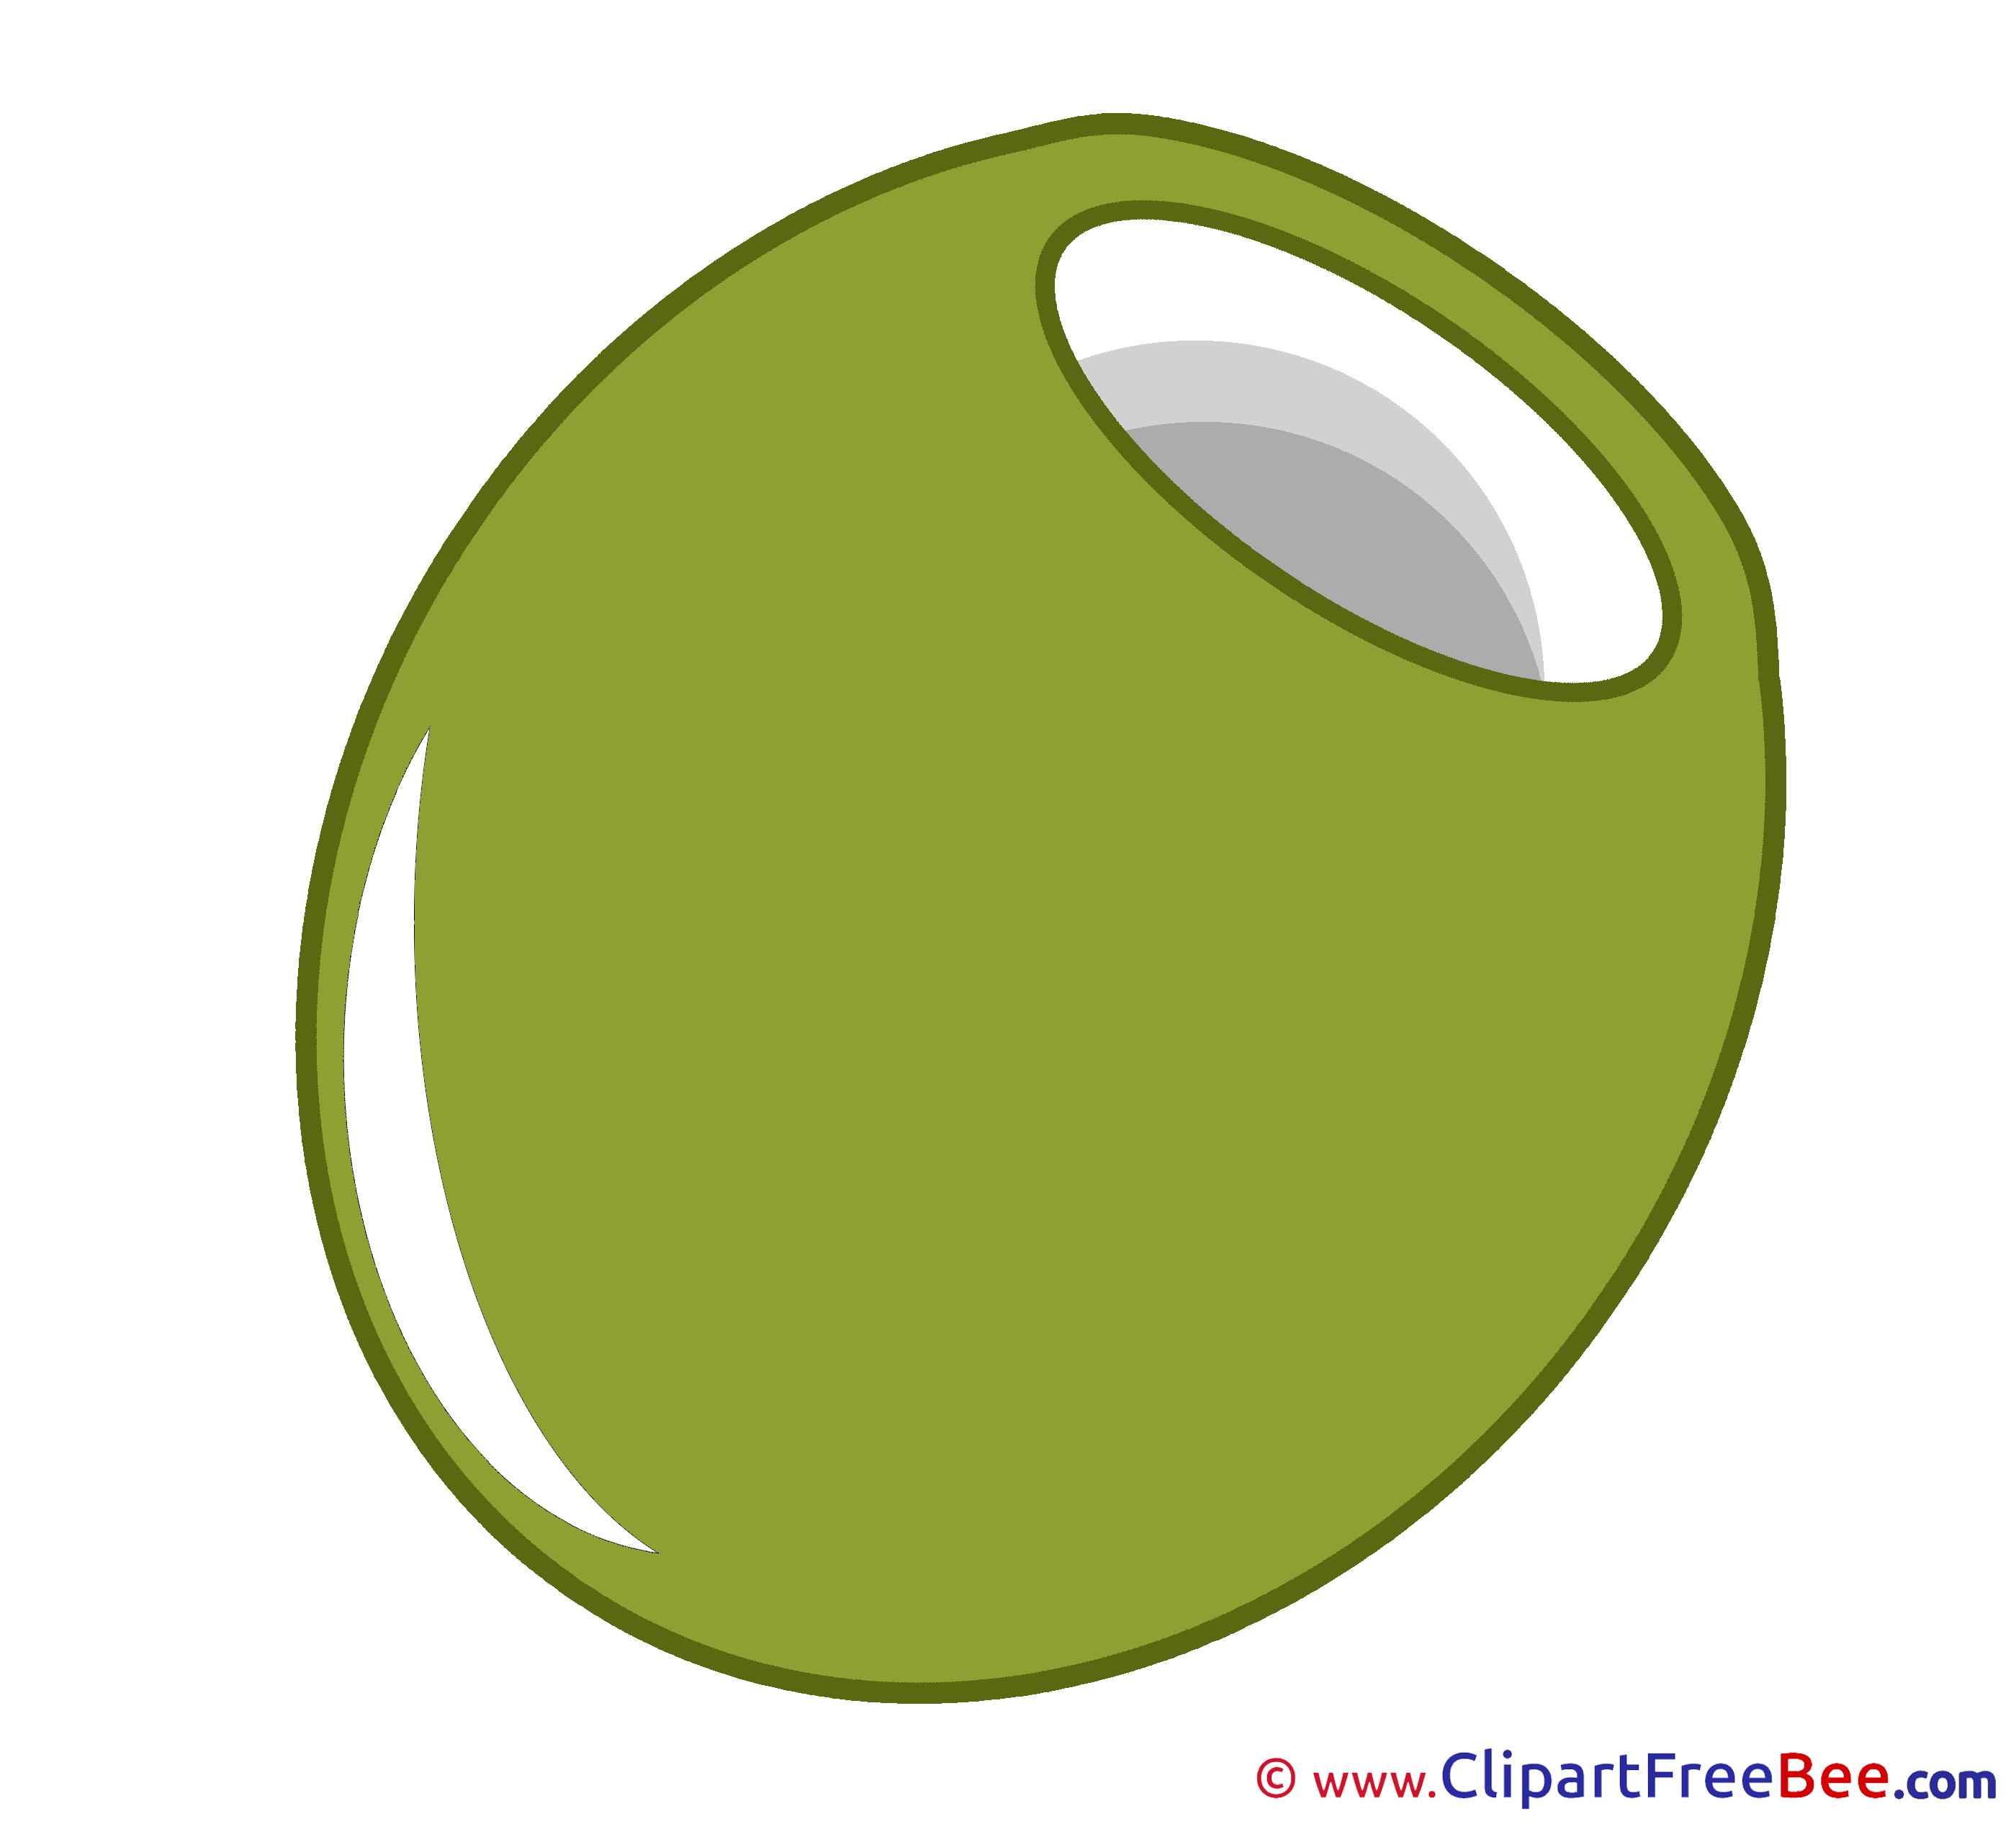 Green Olive download Clip Art for free